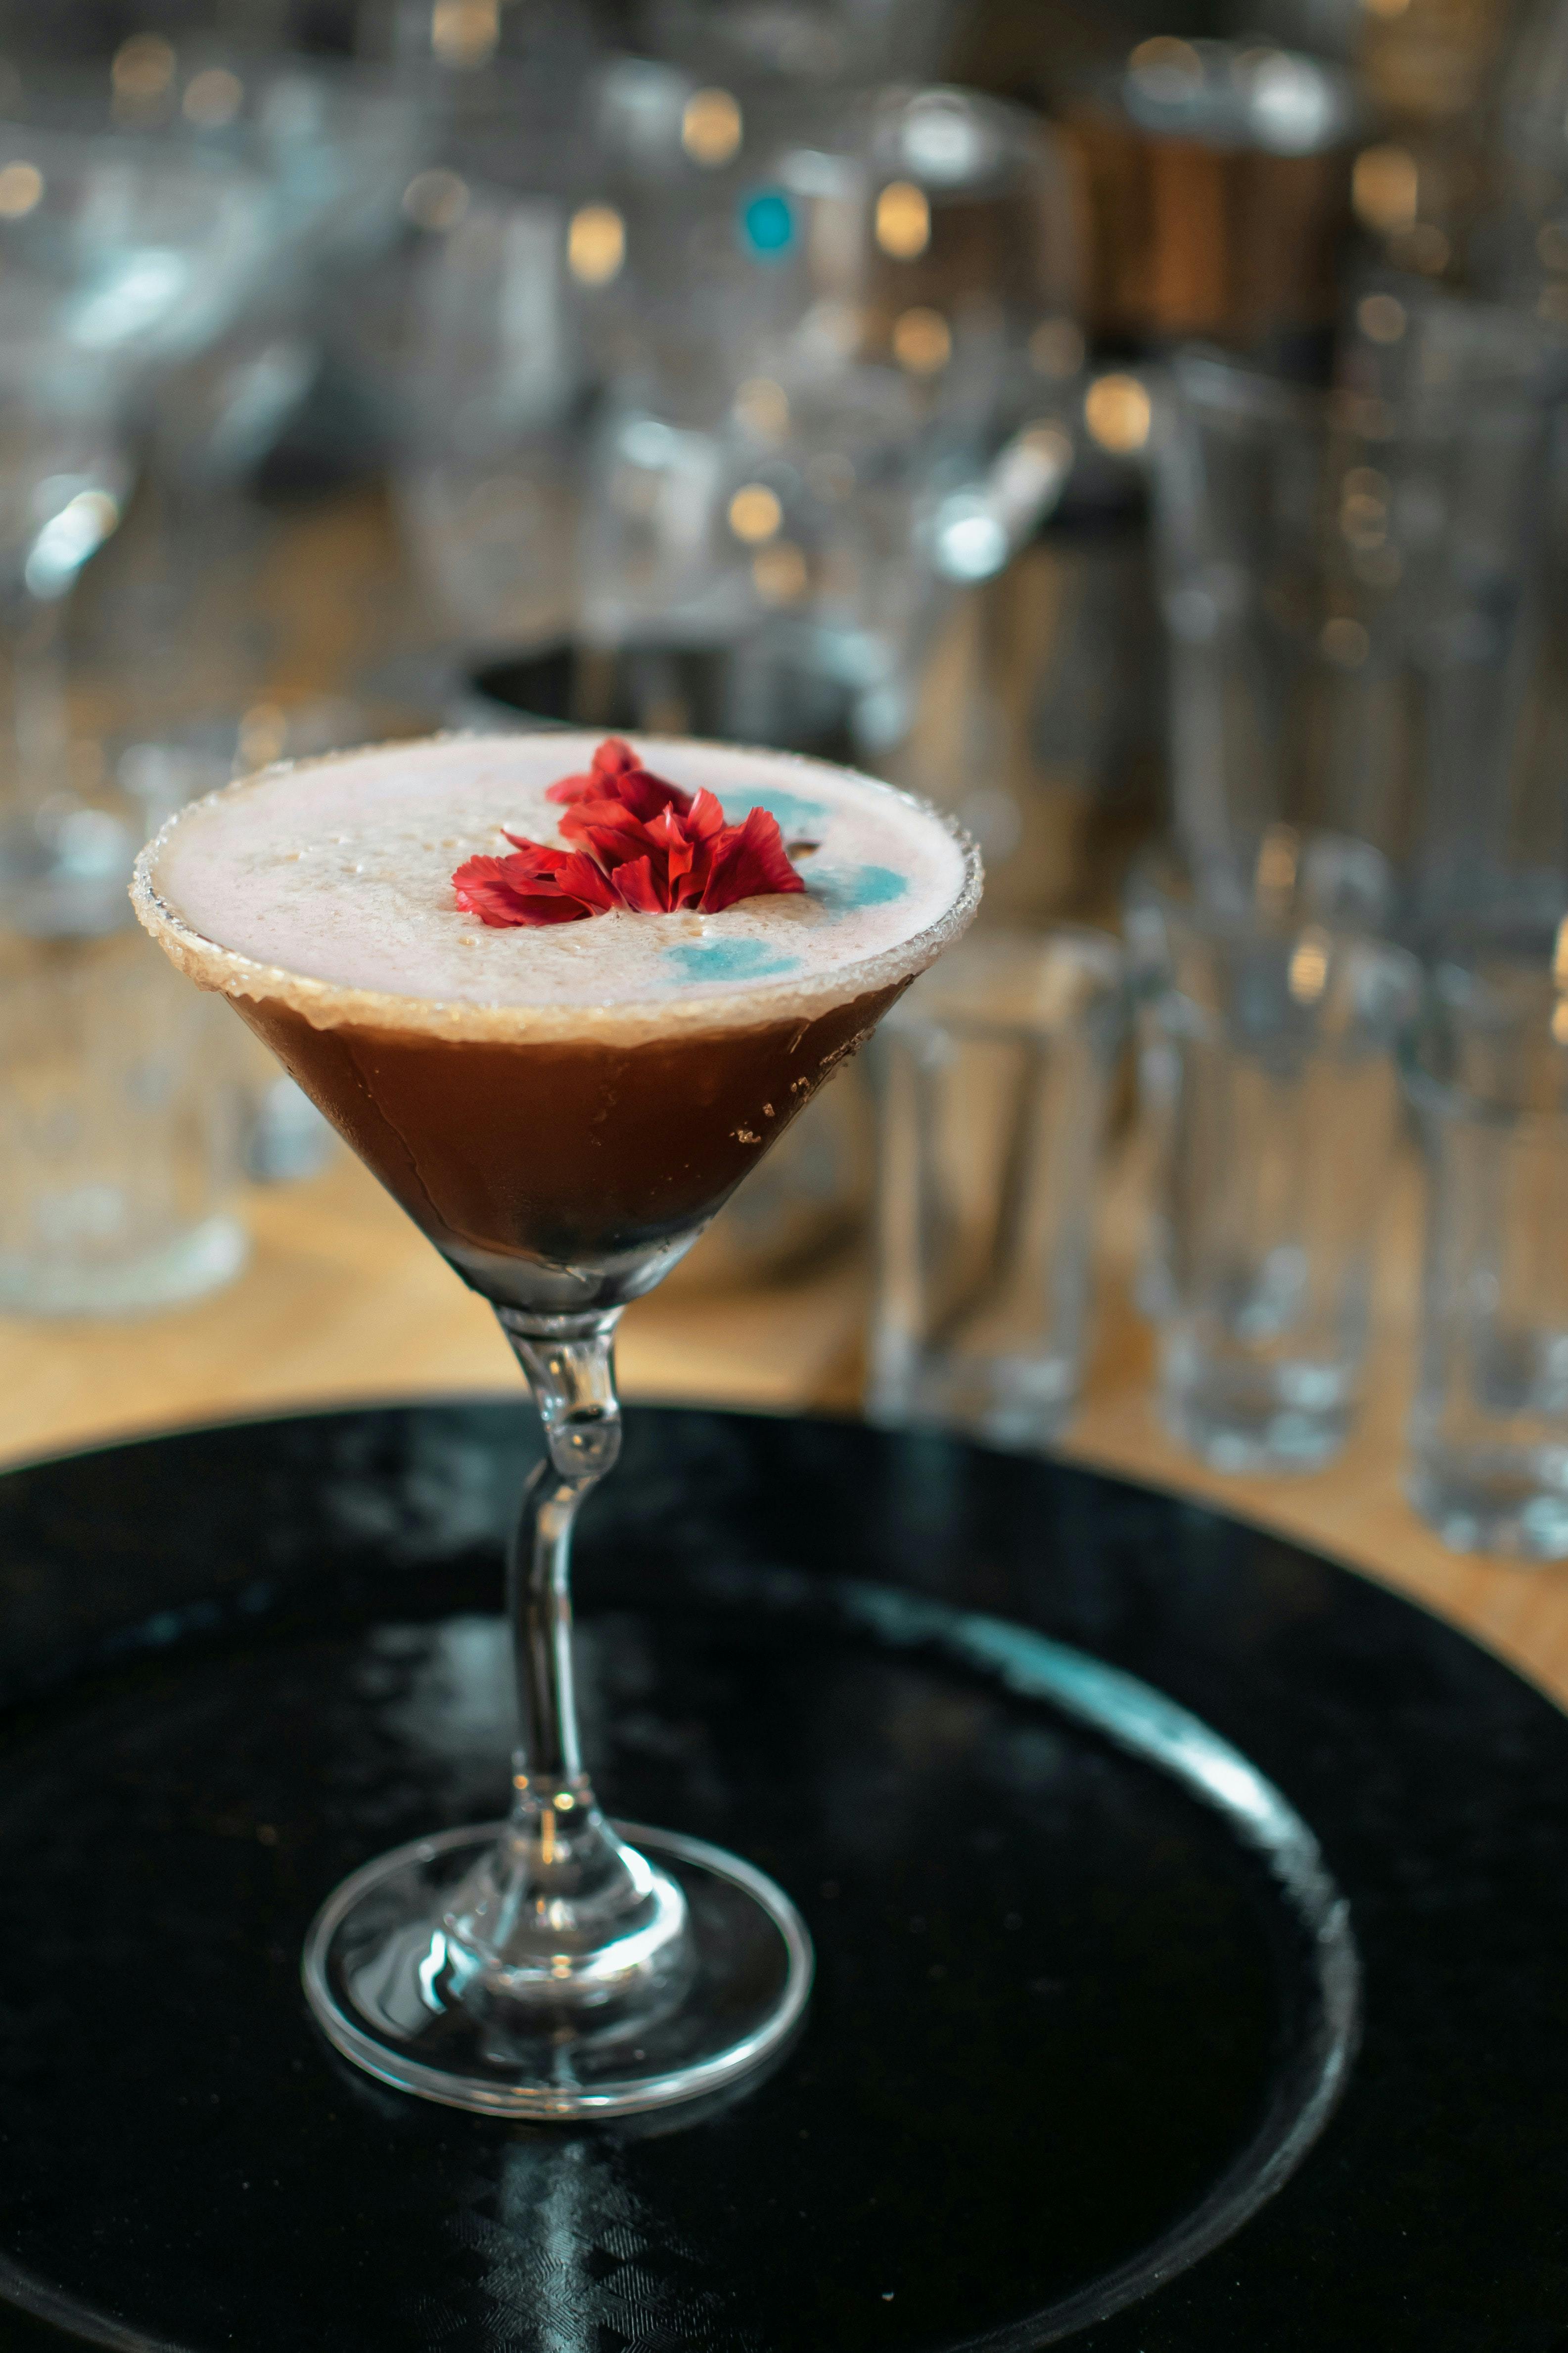 Ep. 299: The Excellence Of An Espresso Martini